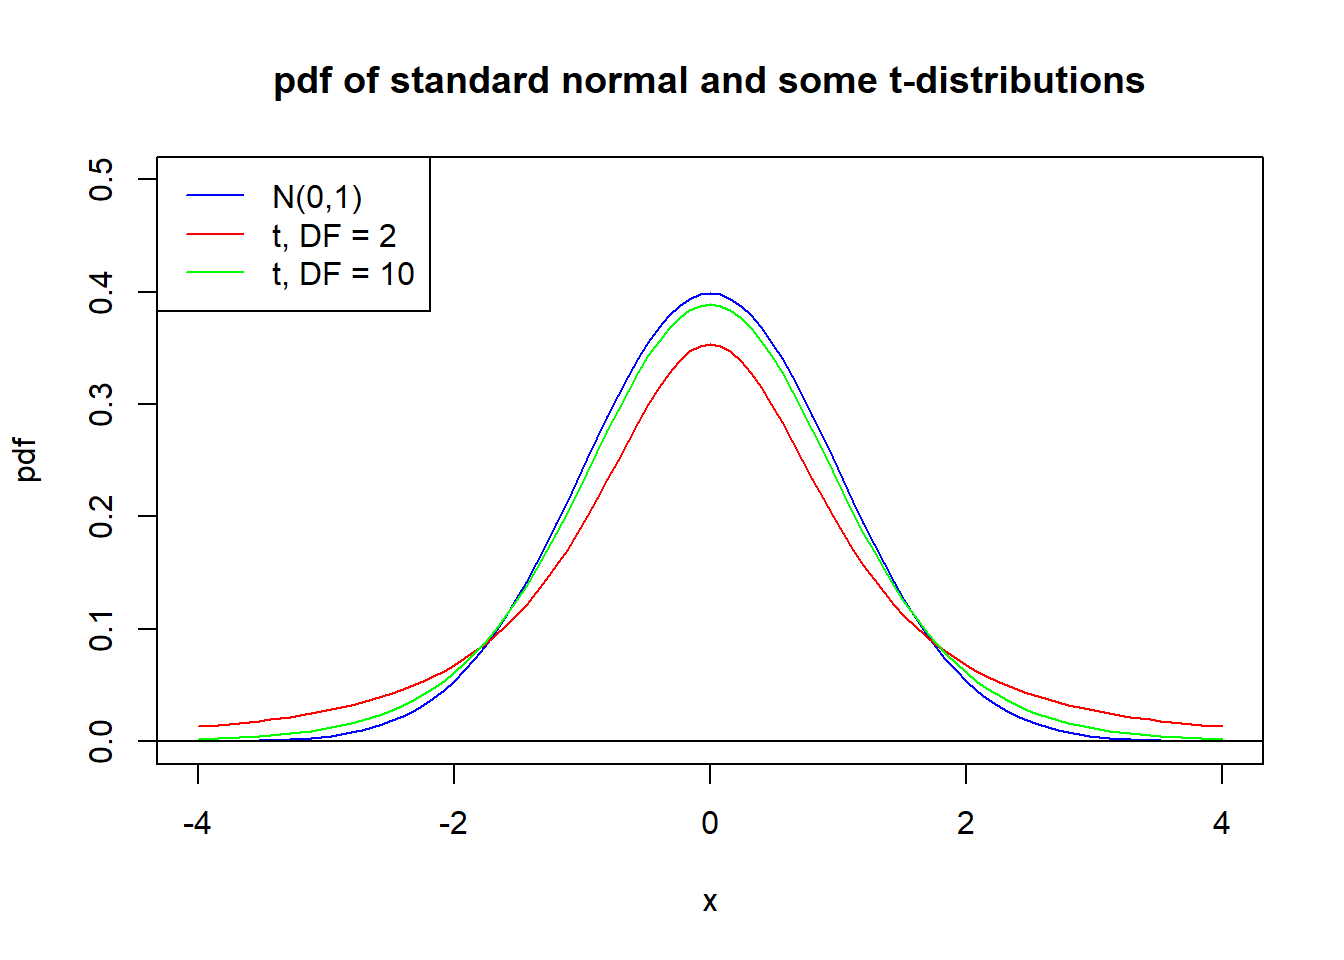 Standard normal and two t-distributions.